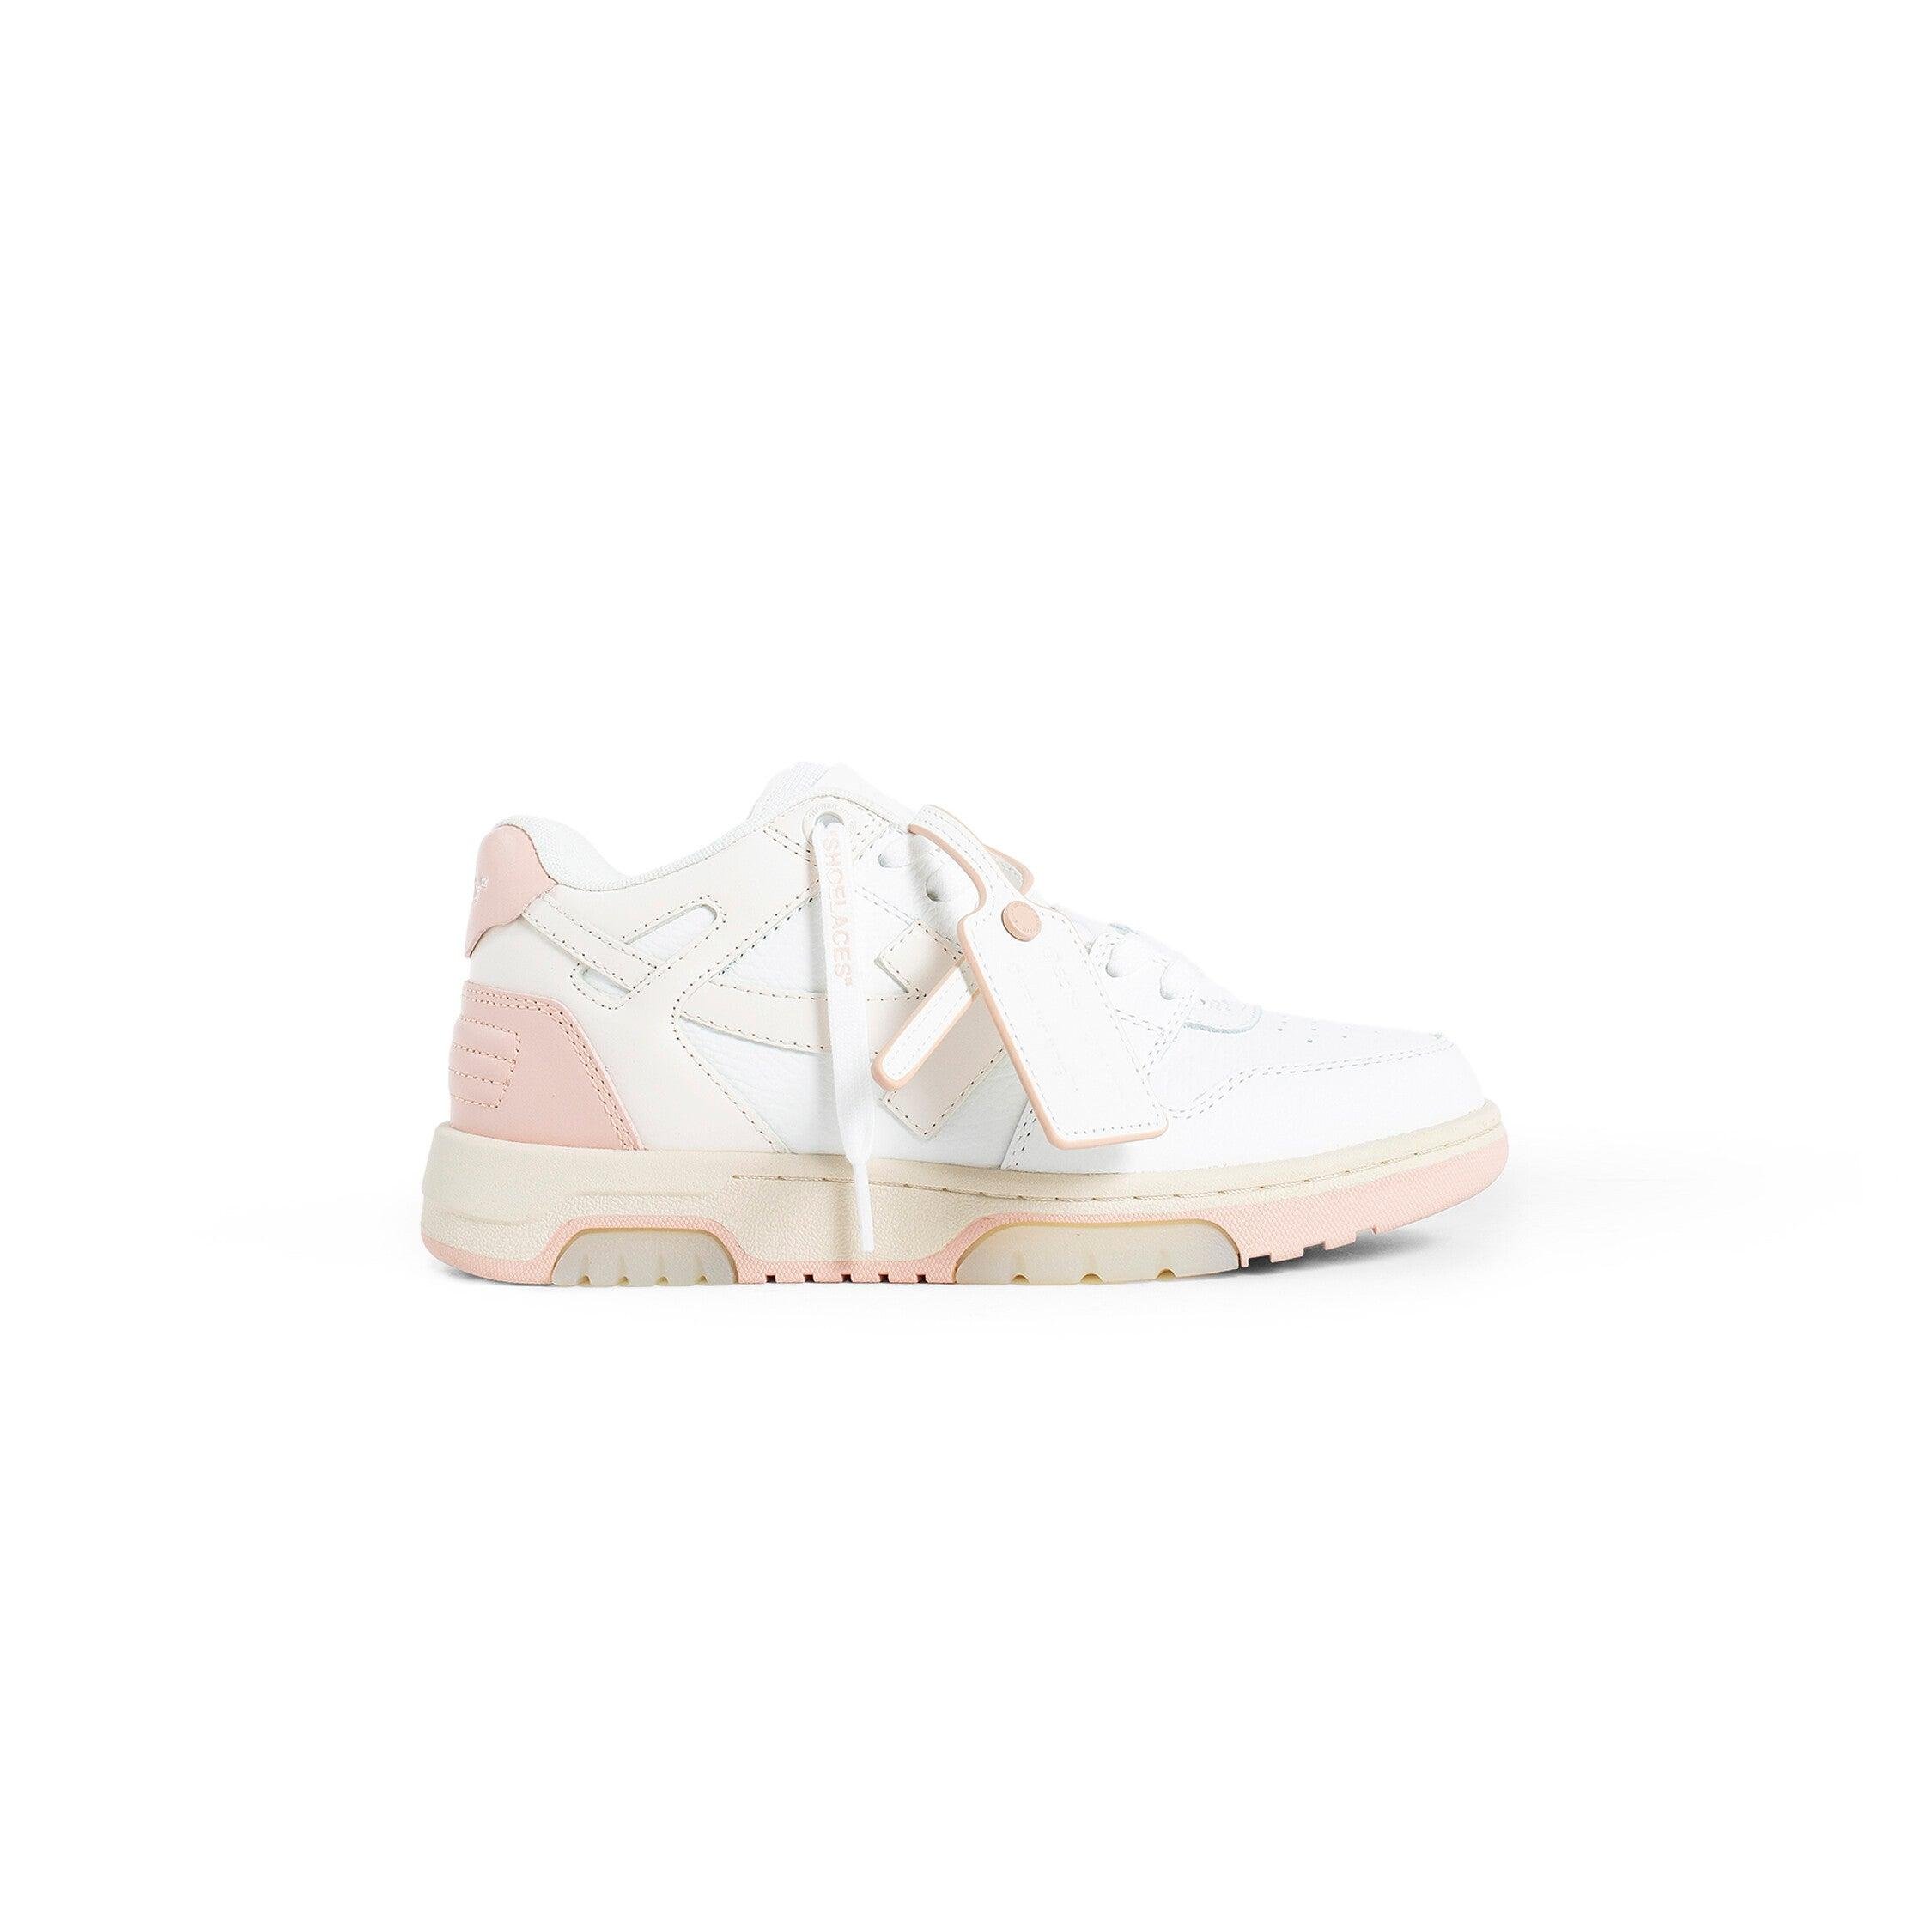 OFF-WHITE WOMAN MULTICOLOR SNEAKERS by OFF-WHITE